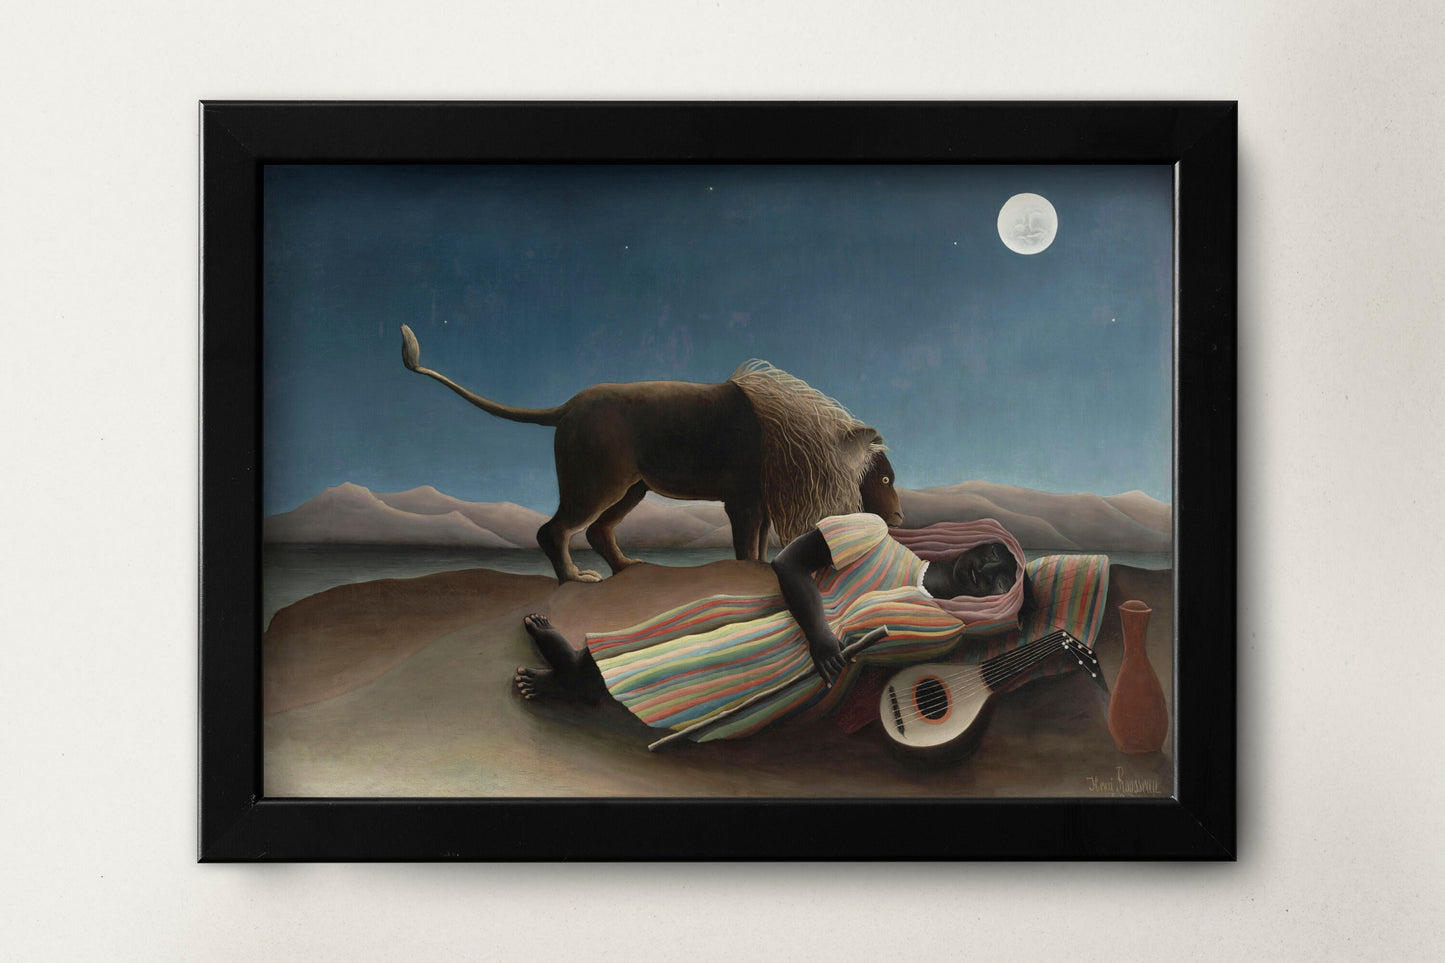 The Sleeping Gypsy by Henri Rousseau Poster Illustration Print Wall Hanging Decor A4 A3 A2